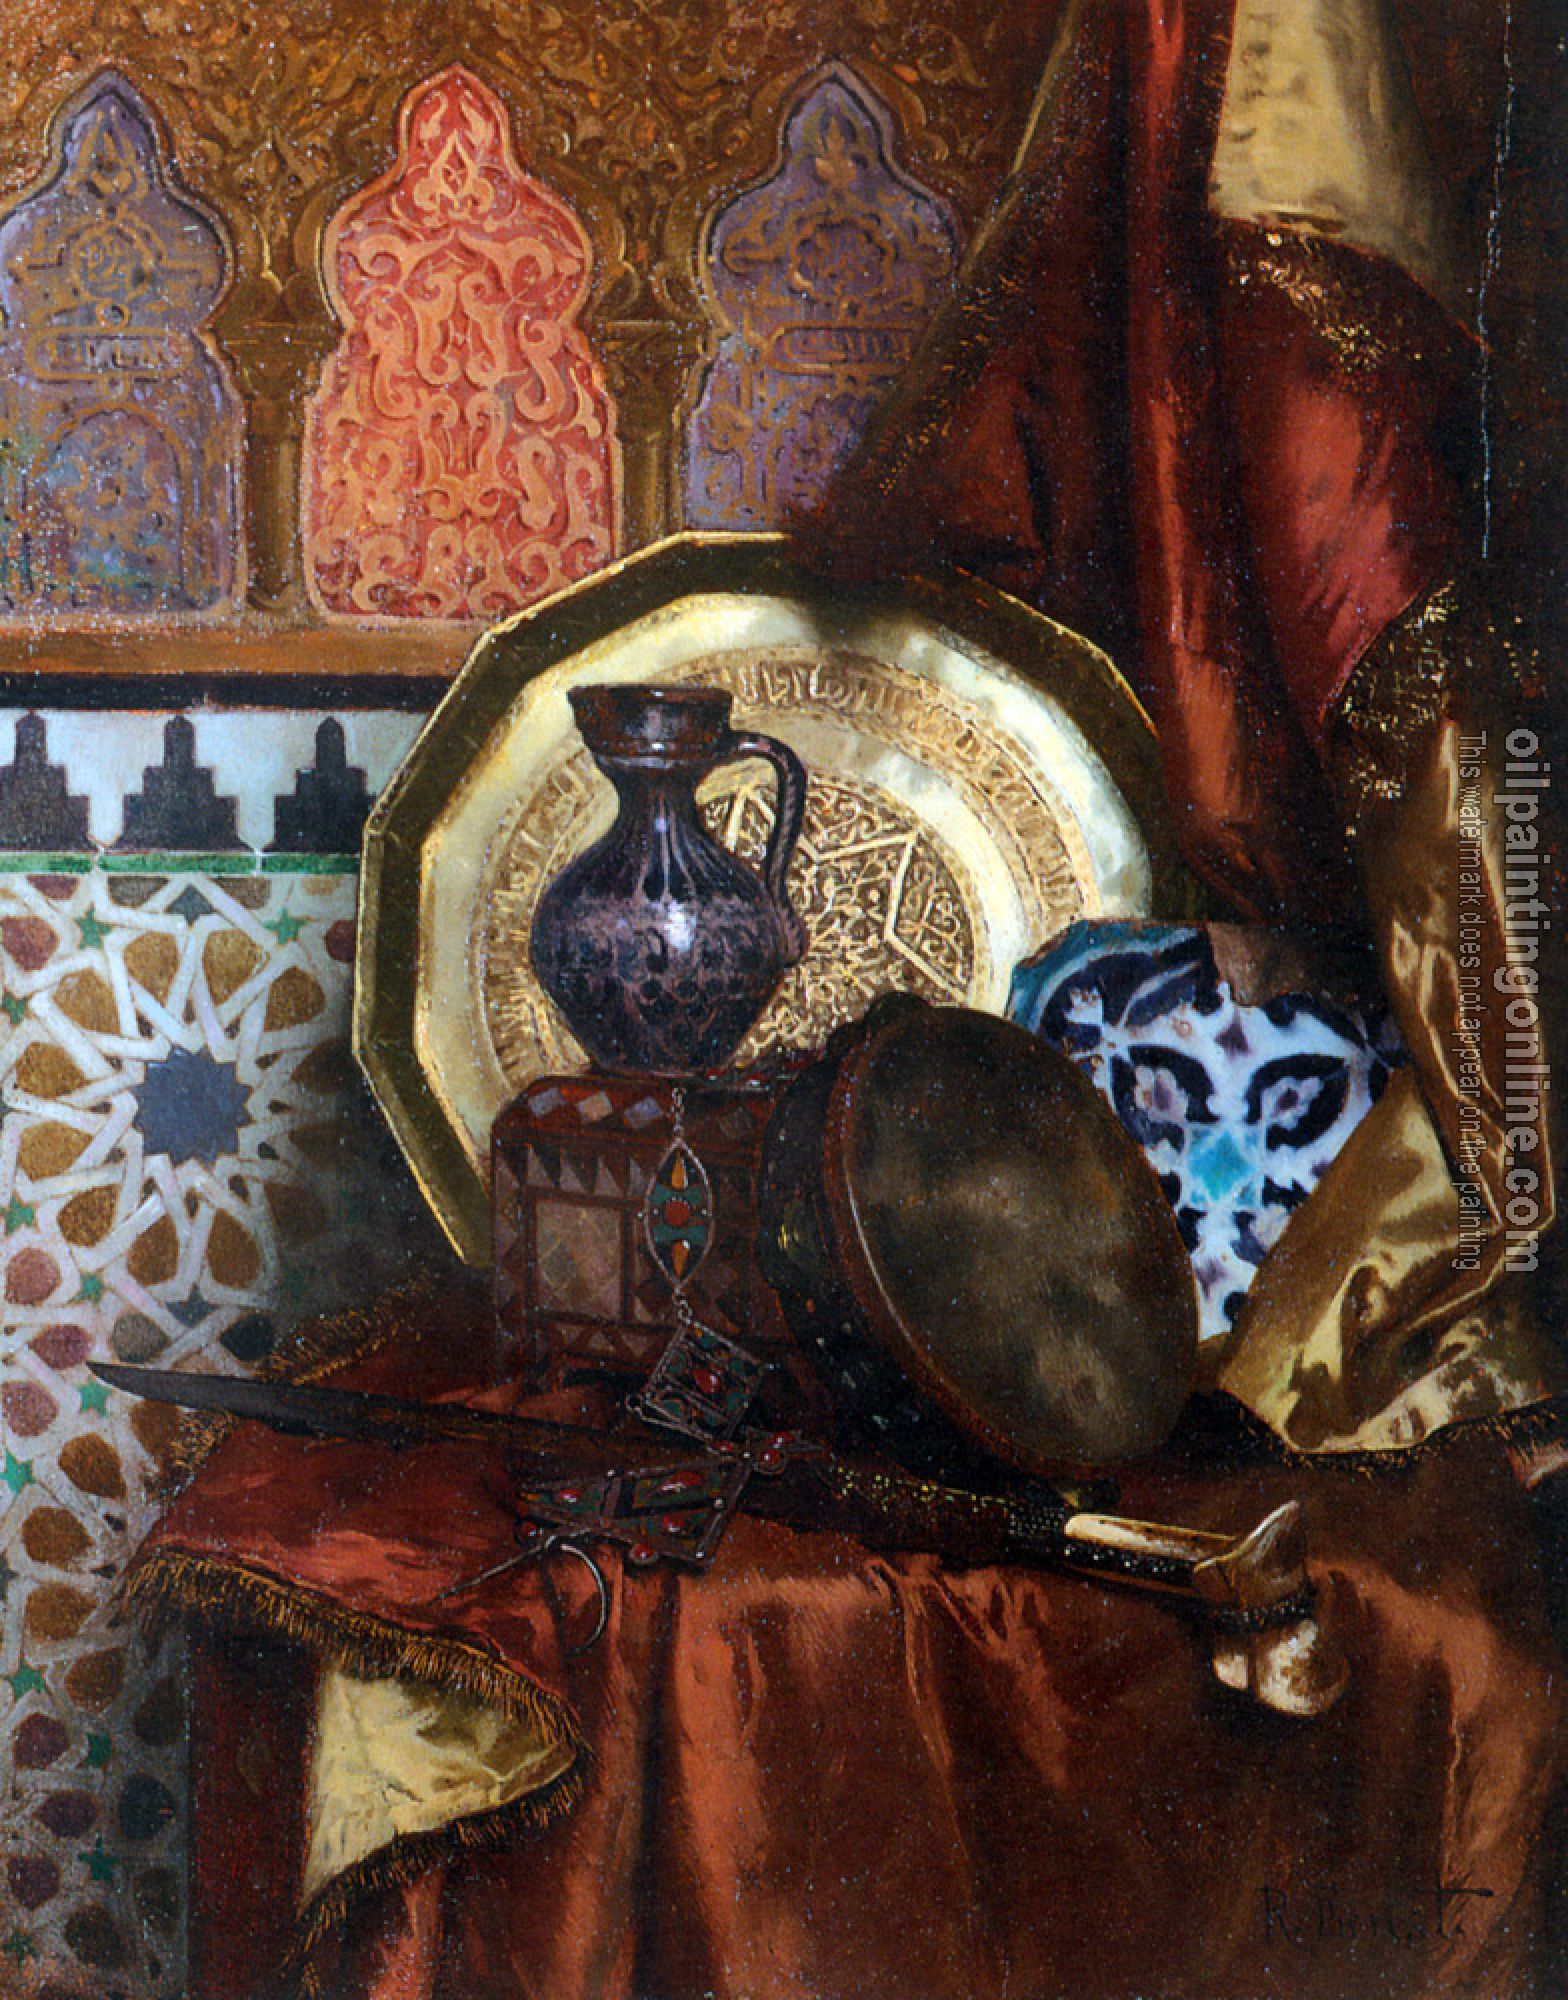 Ernst, Rudolf - A Tambourine, Knife, Moroccan Tile and Plate on Satin covered Table